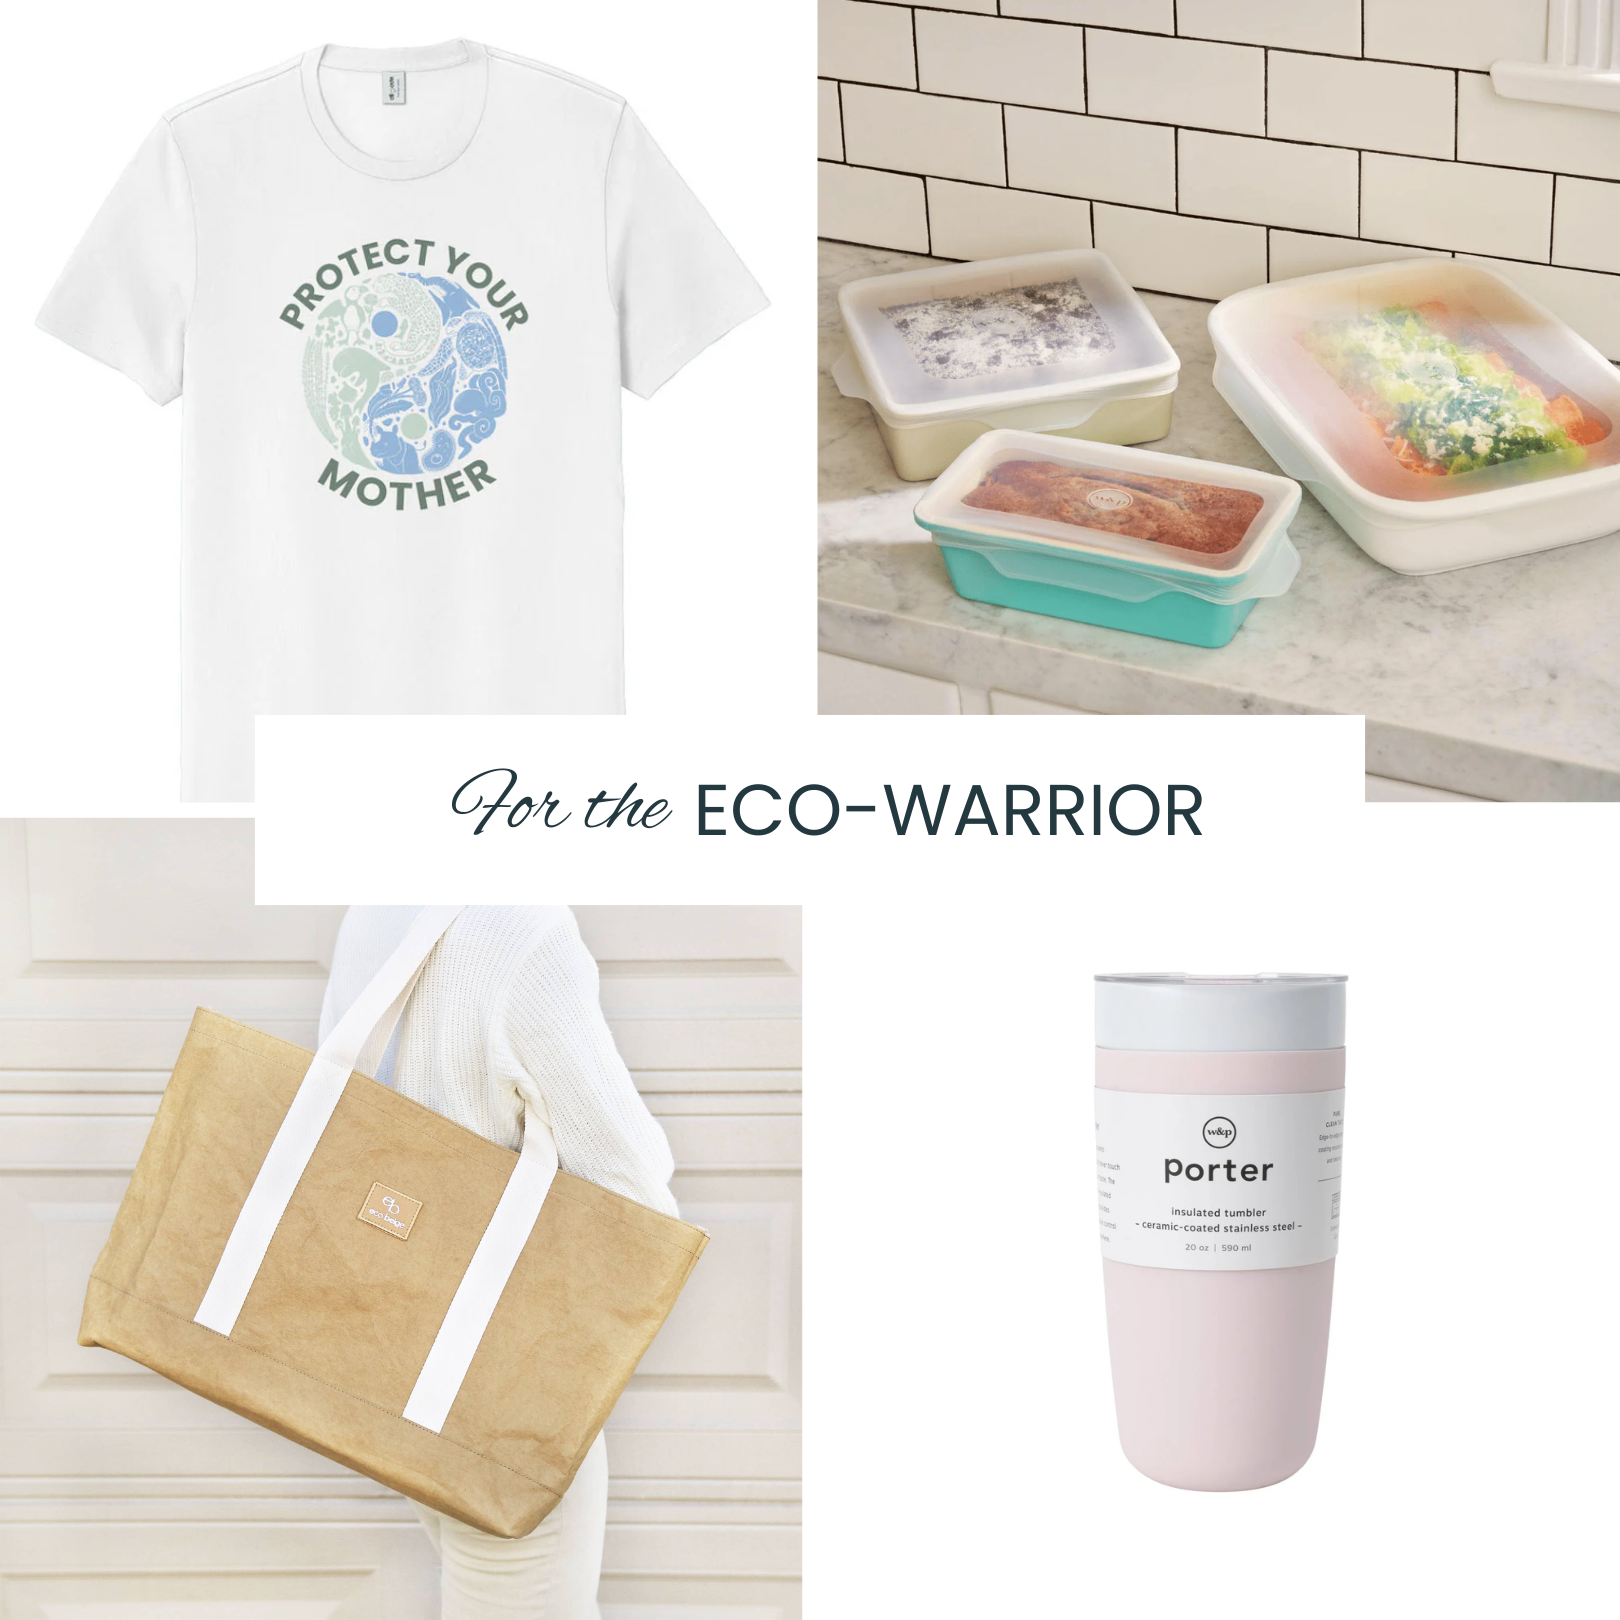 A collage of four images: Protect Your Mother t-shirt, reusable stretch baking covers, a paper leather bag, and reusable ceramic mug